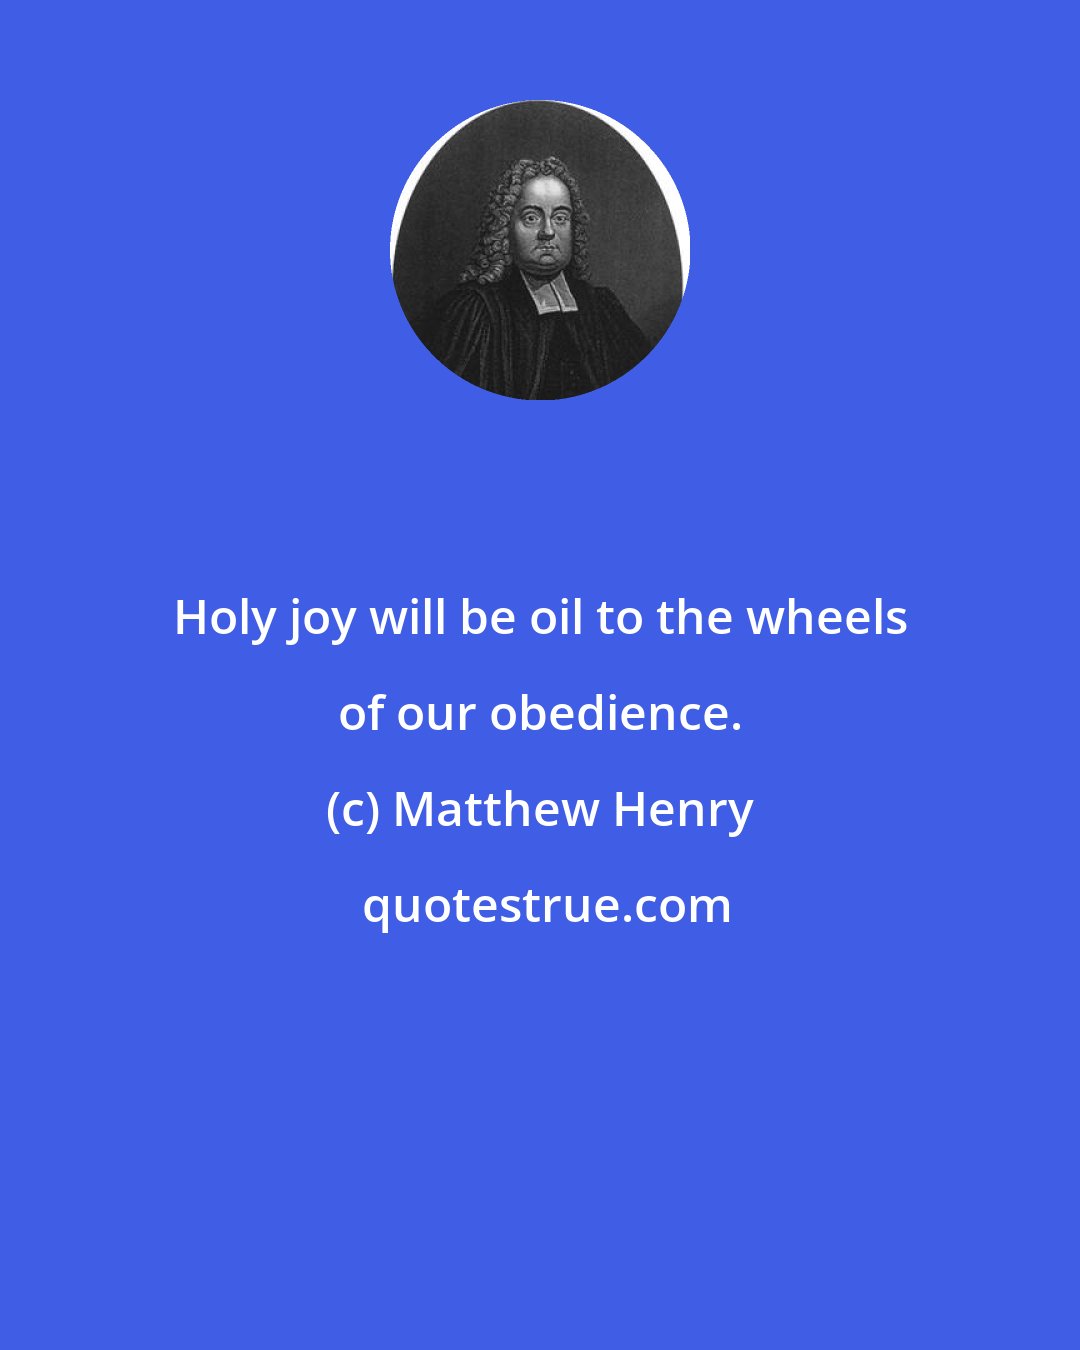 Matthew Henry: Holy joy will be oil to the wheels of our obedience.